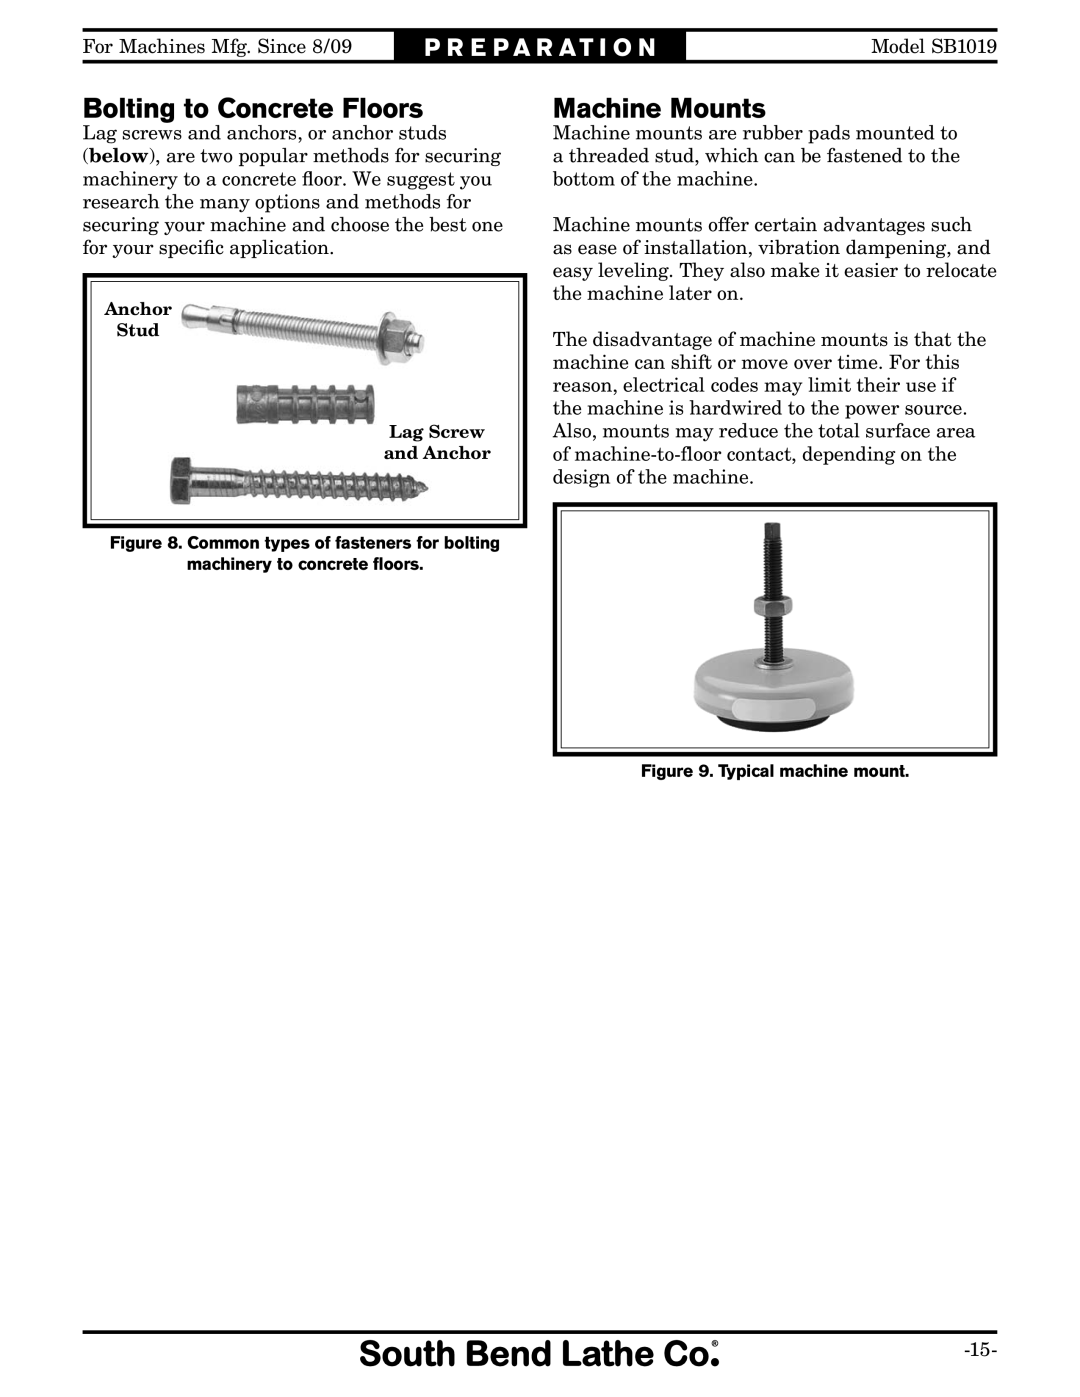 Southbend SB1019 Bolting to Concrete Floors, Machine Mounts, P R E P A R A T I O N, Common types of fasteners for bolting 